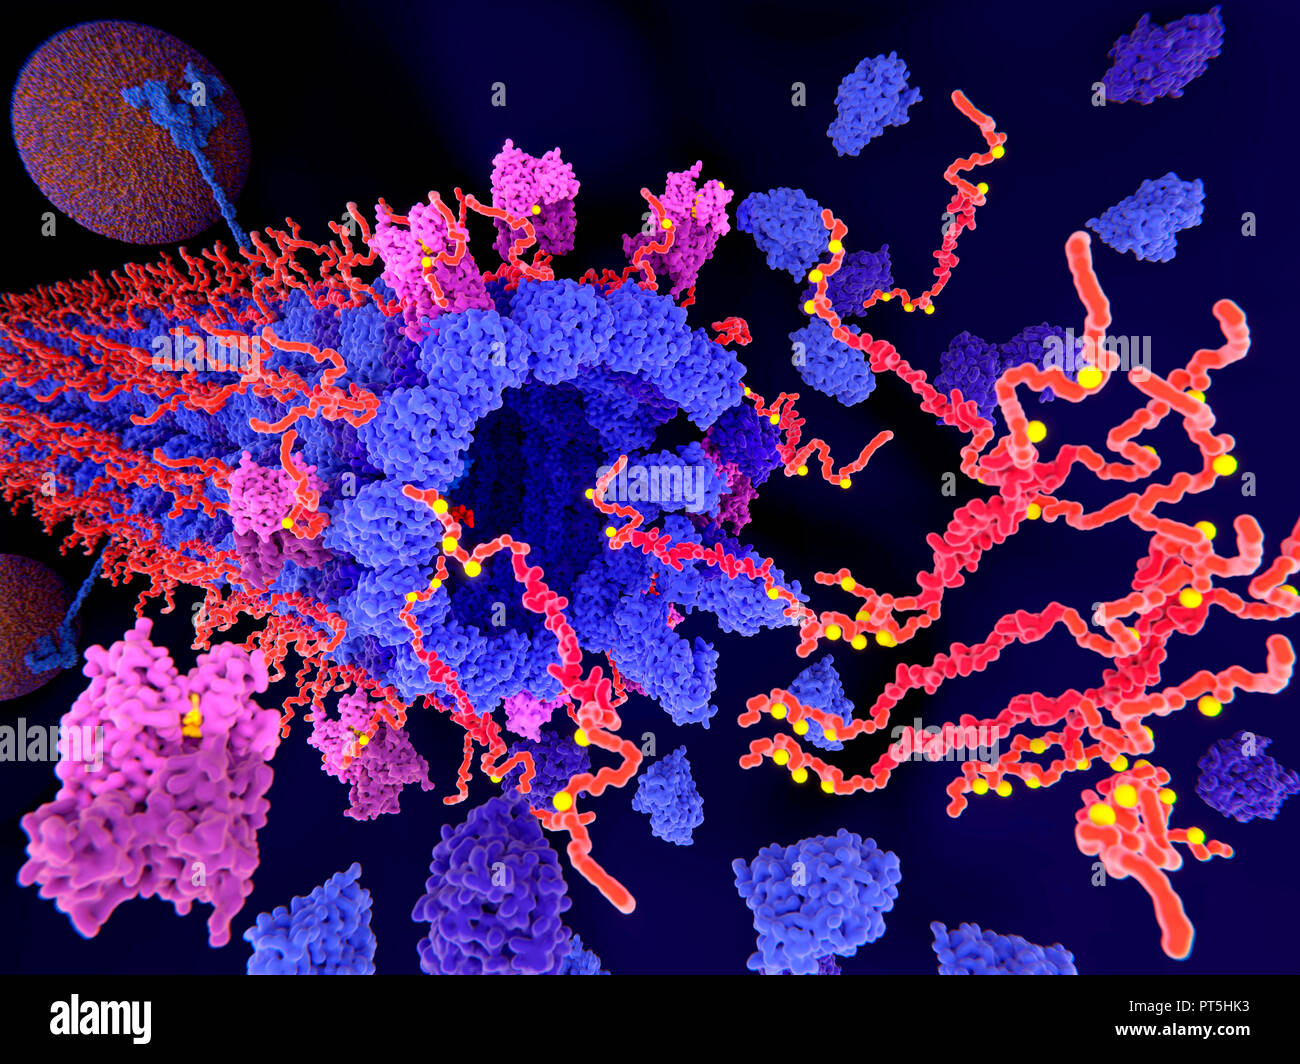 Tau protein in Alzheimer's disease,illustration.Pathological phosphorylation (yellow) of Tau proteins (red-orange) by kinases (blue-purple) affect nerve cells in what is called a neurofibrillary tangle.This illustration shows pathological aggregations of tau proteins causing disintegration of a microtubule (cylindrical structure).The transport of synaptic vesicles (orange-blue spheres,one at top left) is also interrupted.A neurofibrillary tangle consists of abnormal aggregates and insoluble fibres of the protein tau. Stock Photo